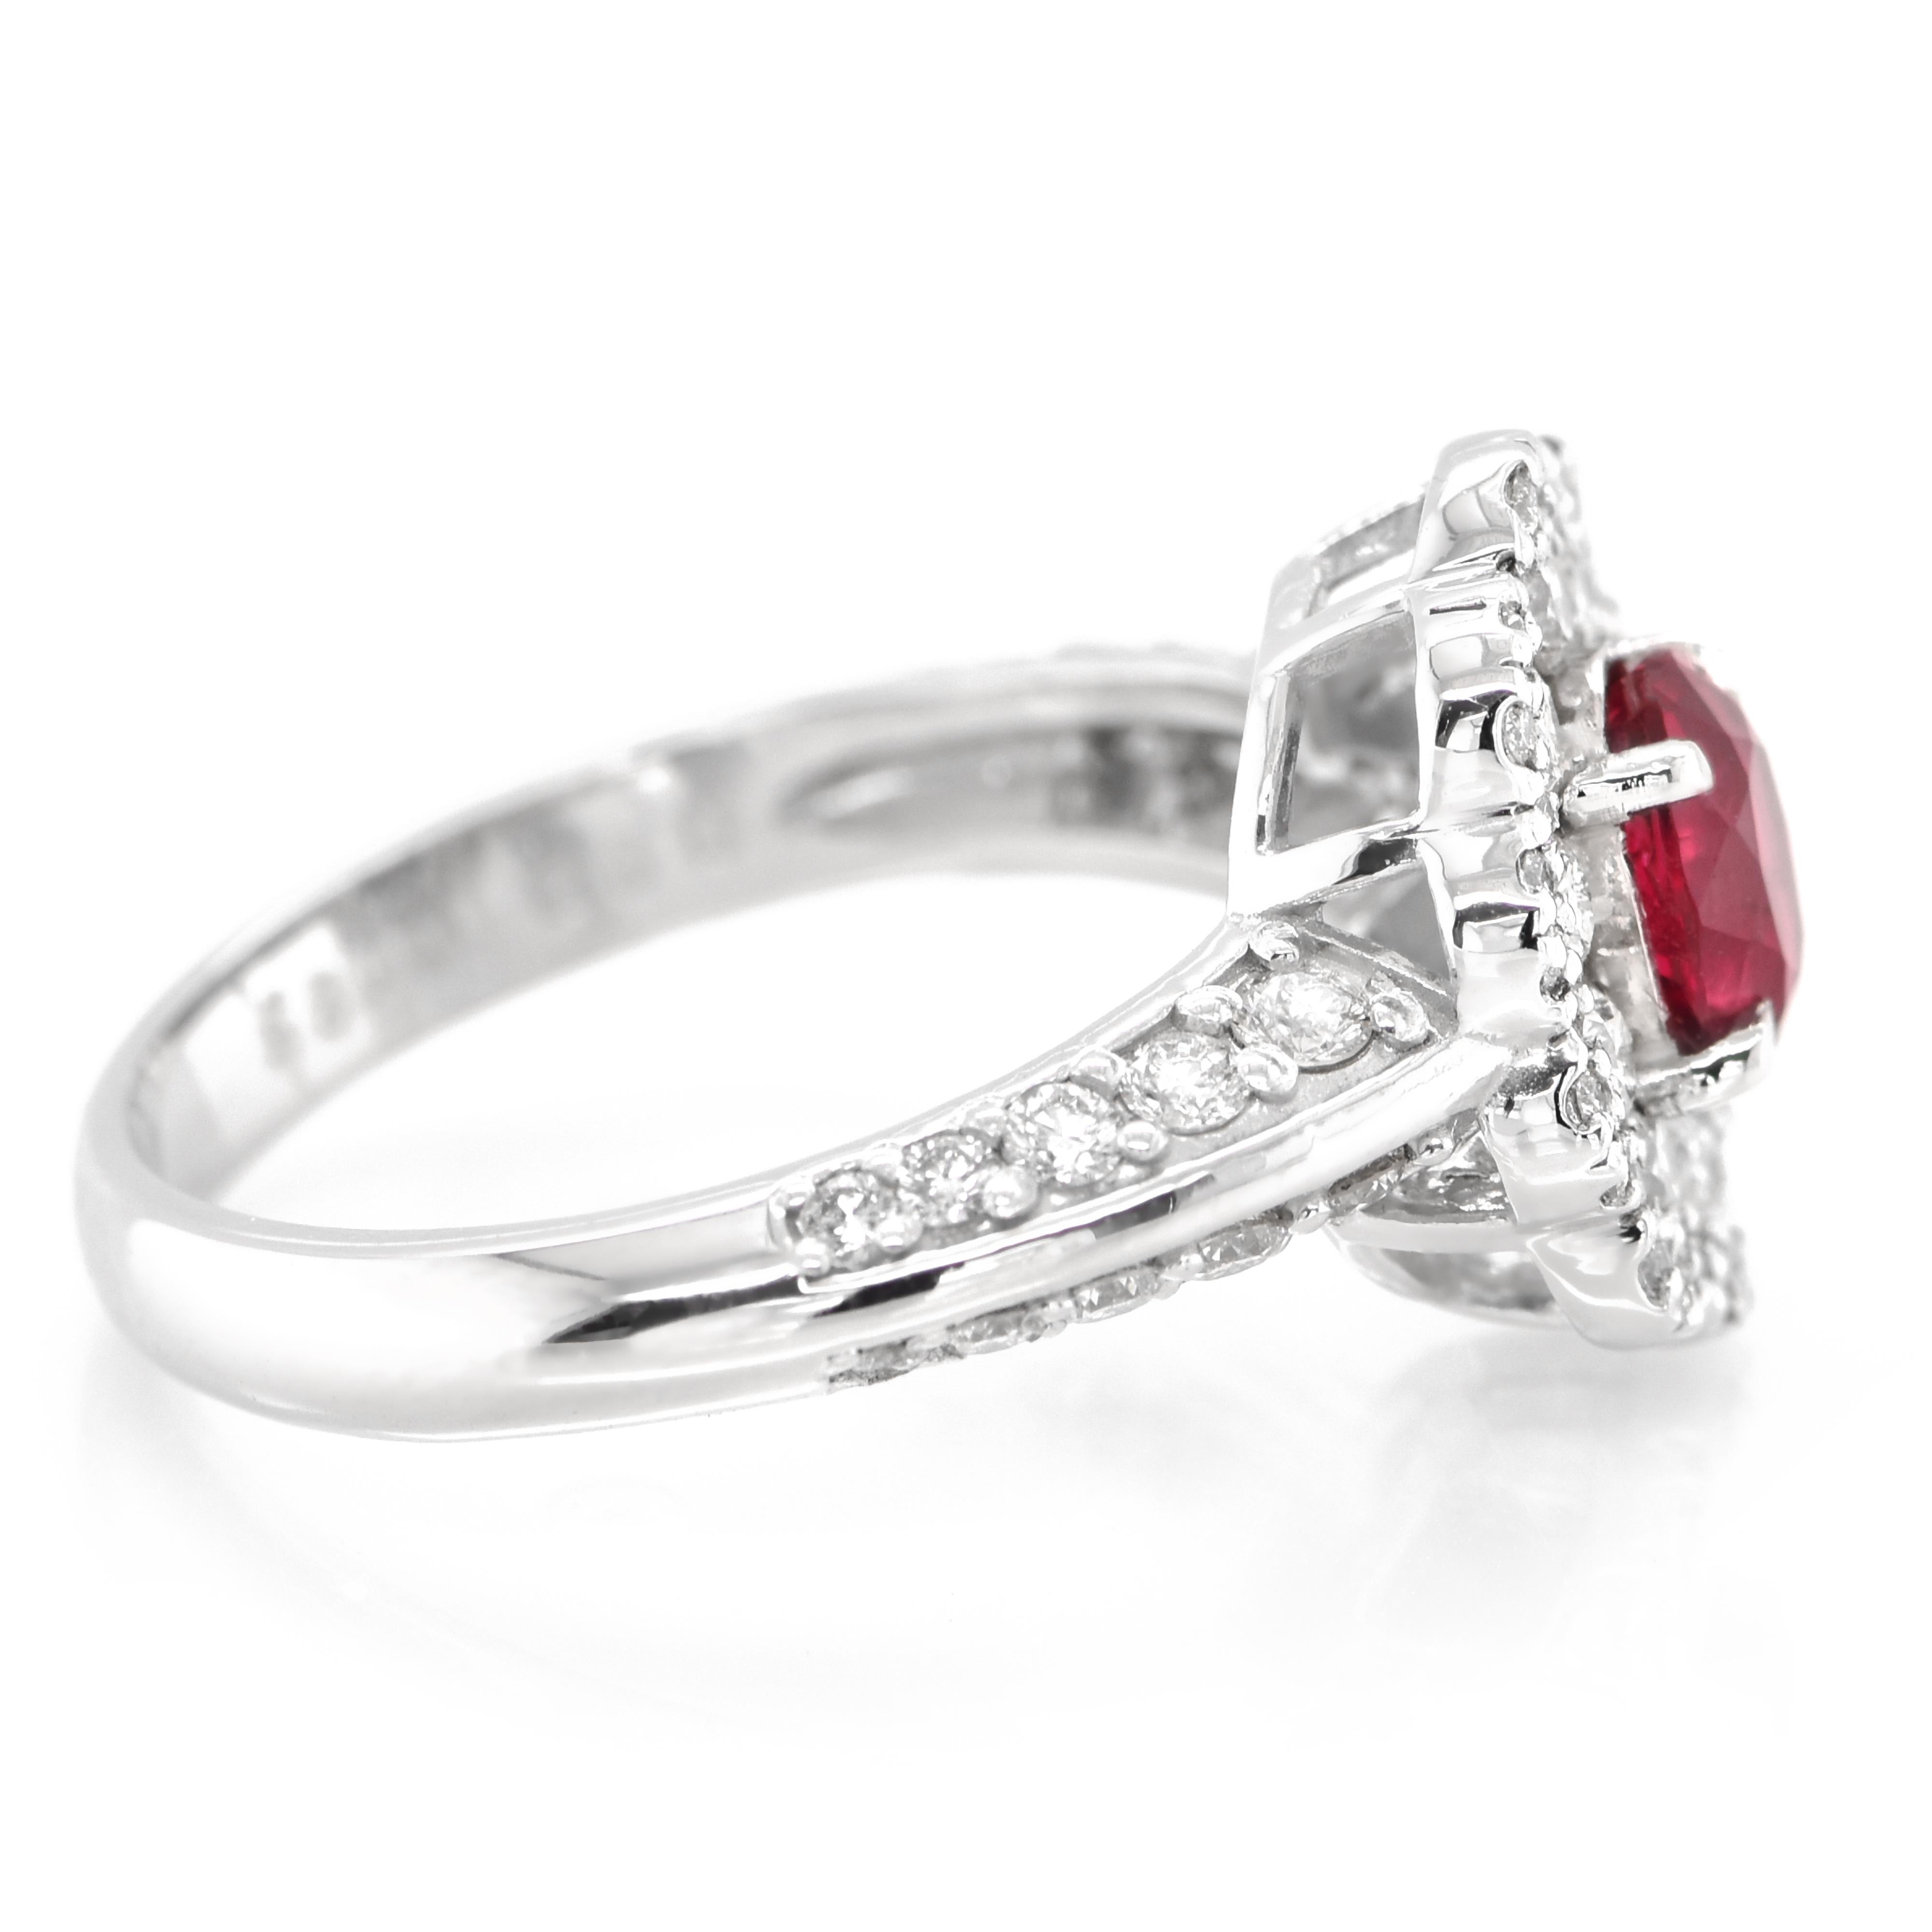 Oval Cut Gia Certified 0.92 Carat Natural Thai 'Siam' Ruby Ring Set in Platinum